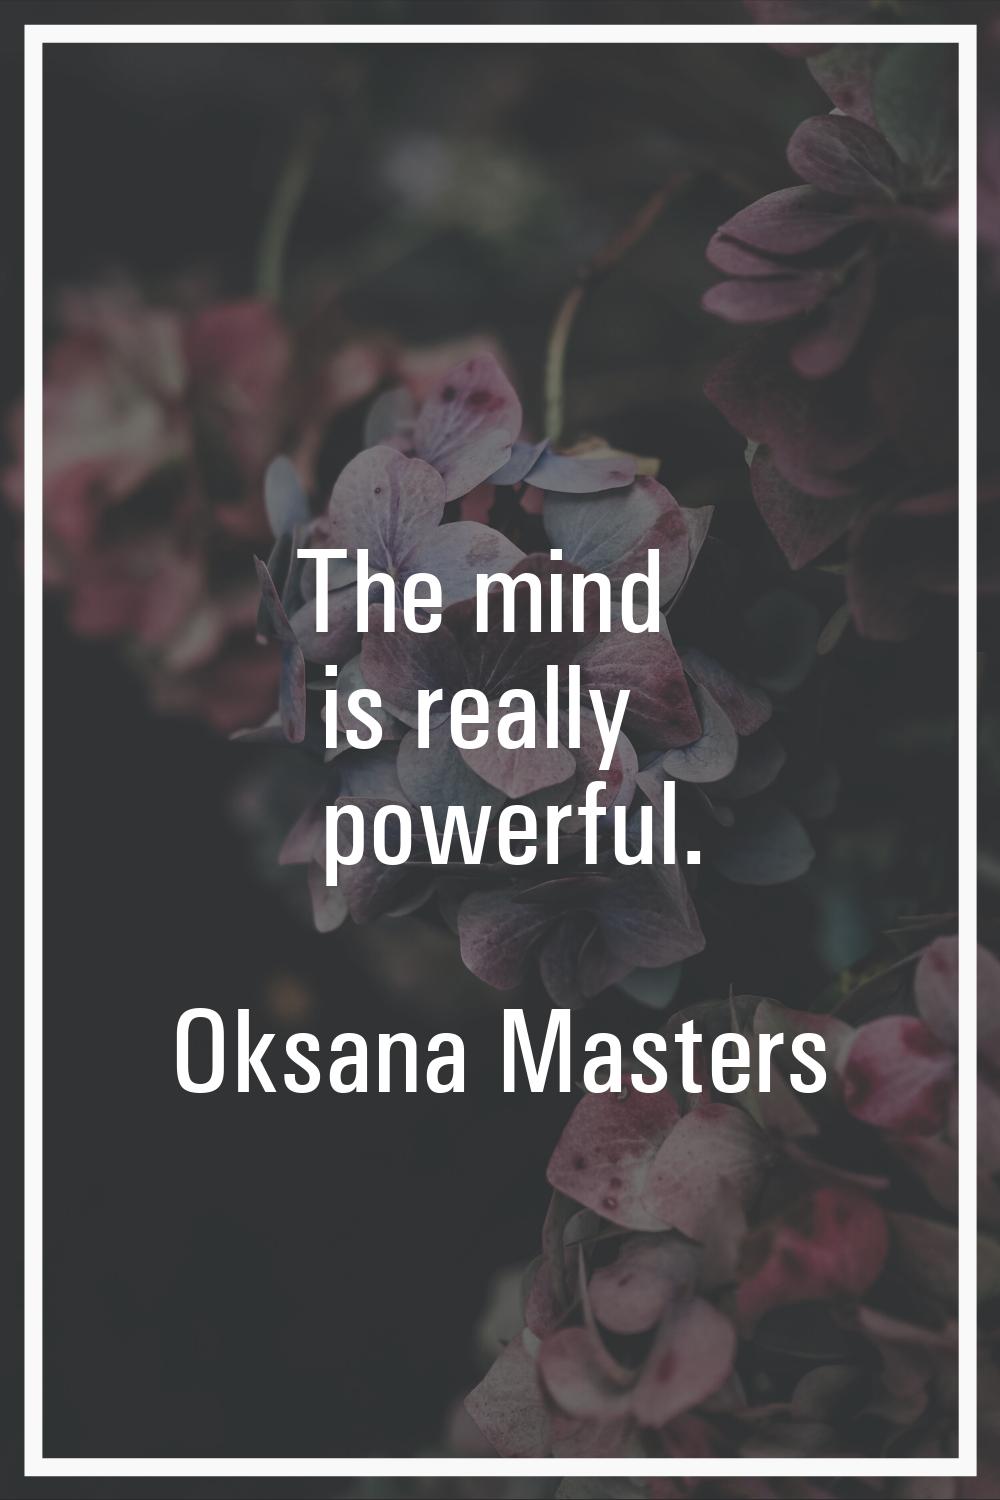 The mind is really powerful.